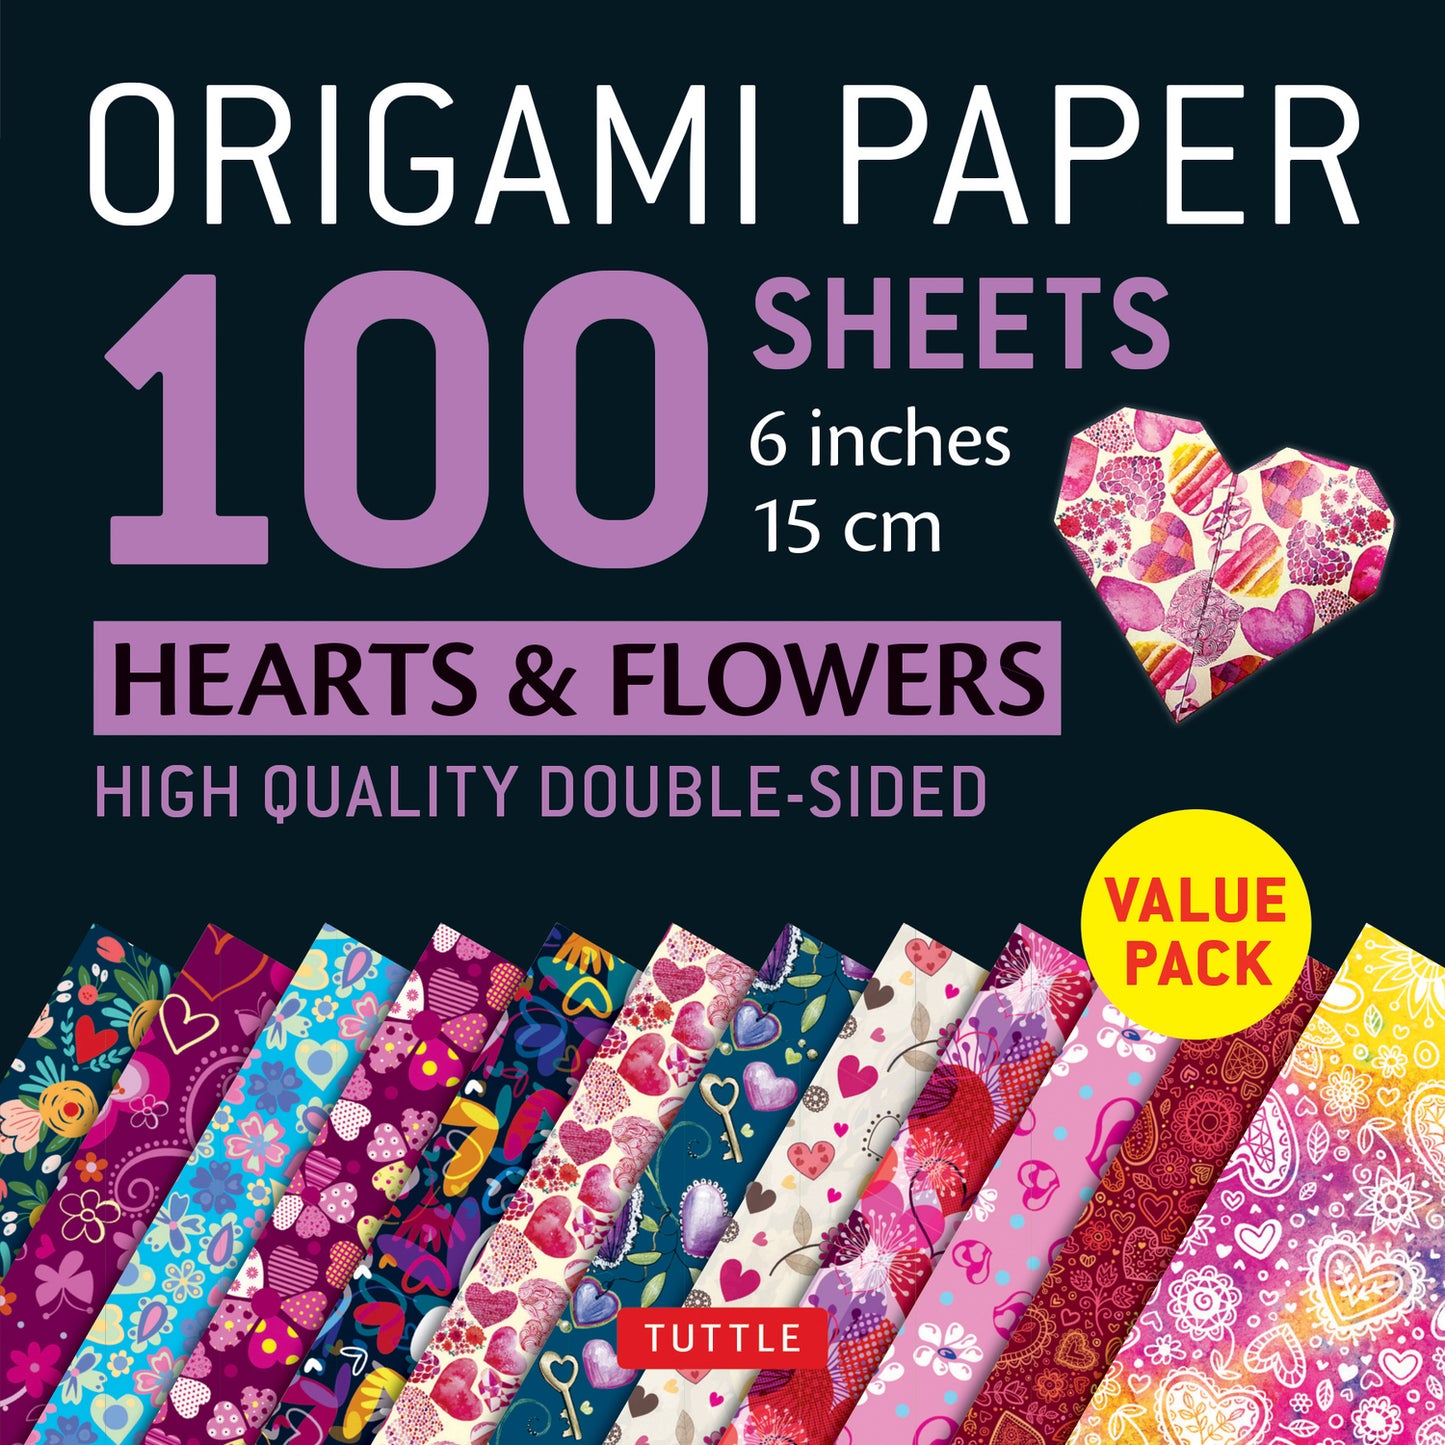 Origami Paper 100 sheets Hearts & Flowers 6" (15 cm): Tuttle Origami Paper: Double-Sided Origami Sheets Printed with 12 Different Patterns: Instructions for 6 Projects Included